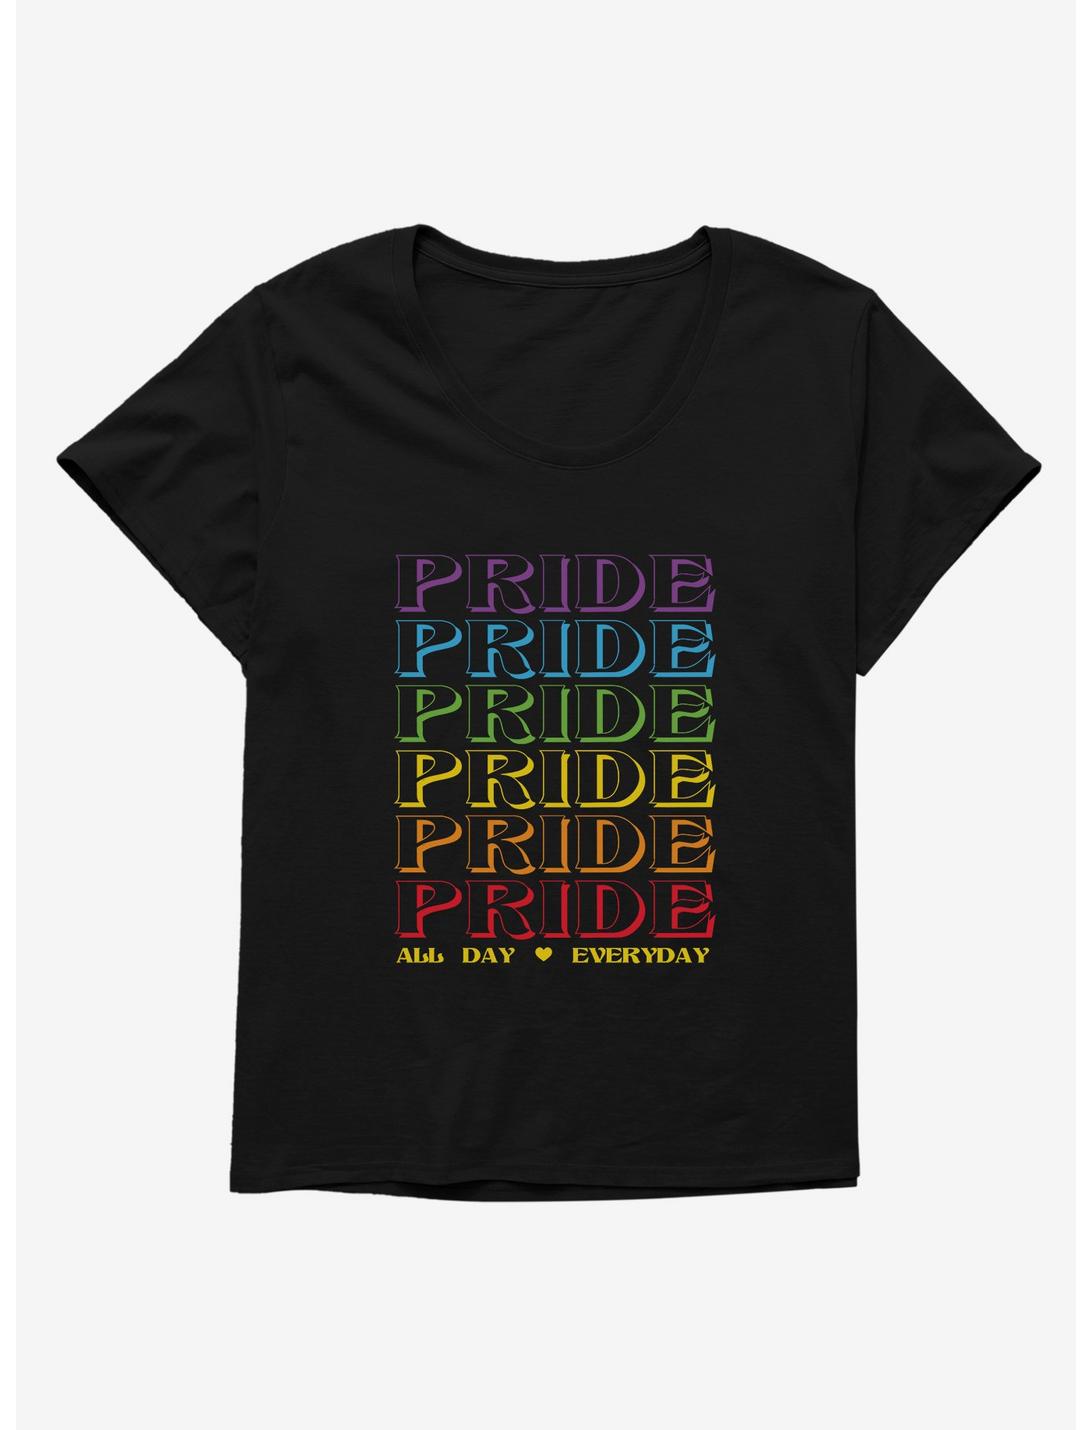 Pride All Day Everyday Girls T-Shirt Plus Size, BLACK, hi-res